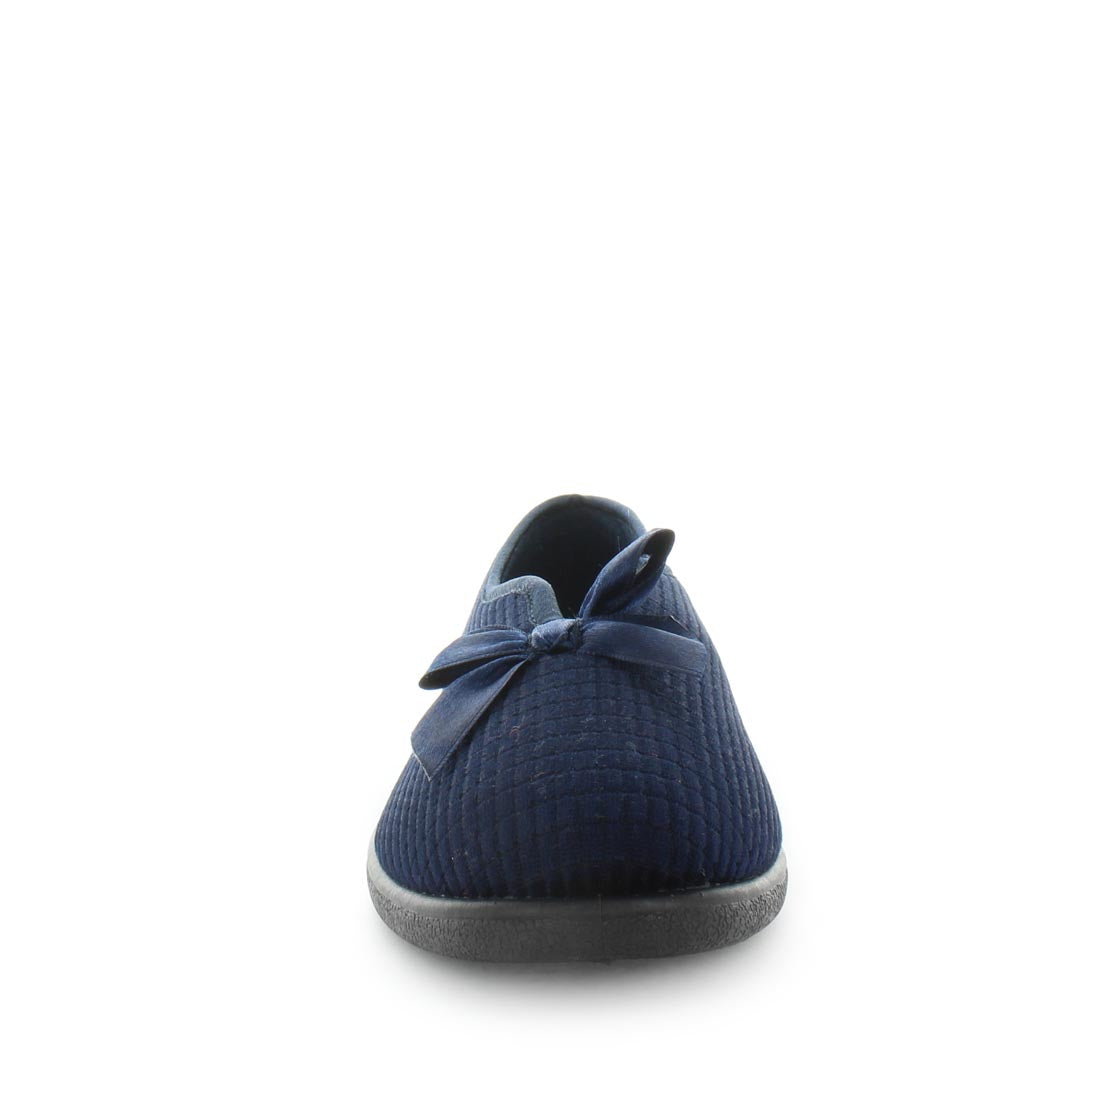 Load image into Gallery viewer, EMILIA by PANDA  - Flat style comfort slippers - comfort slippers weith a cute little bow and satin style lining and sock - comfort slippers
